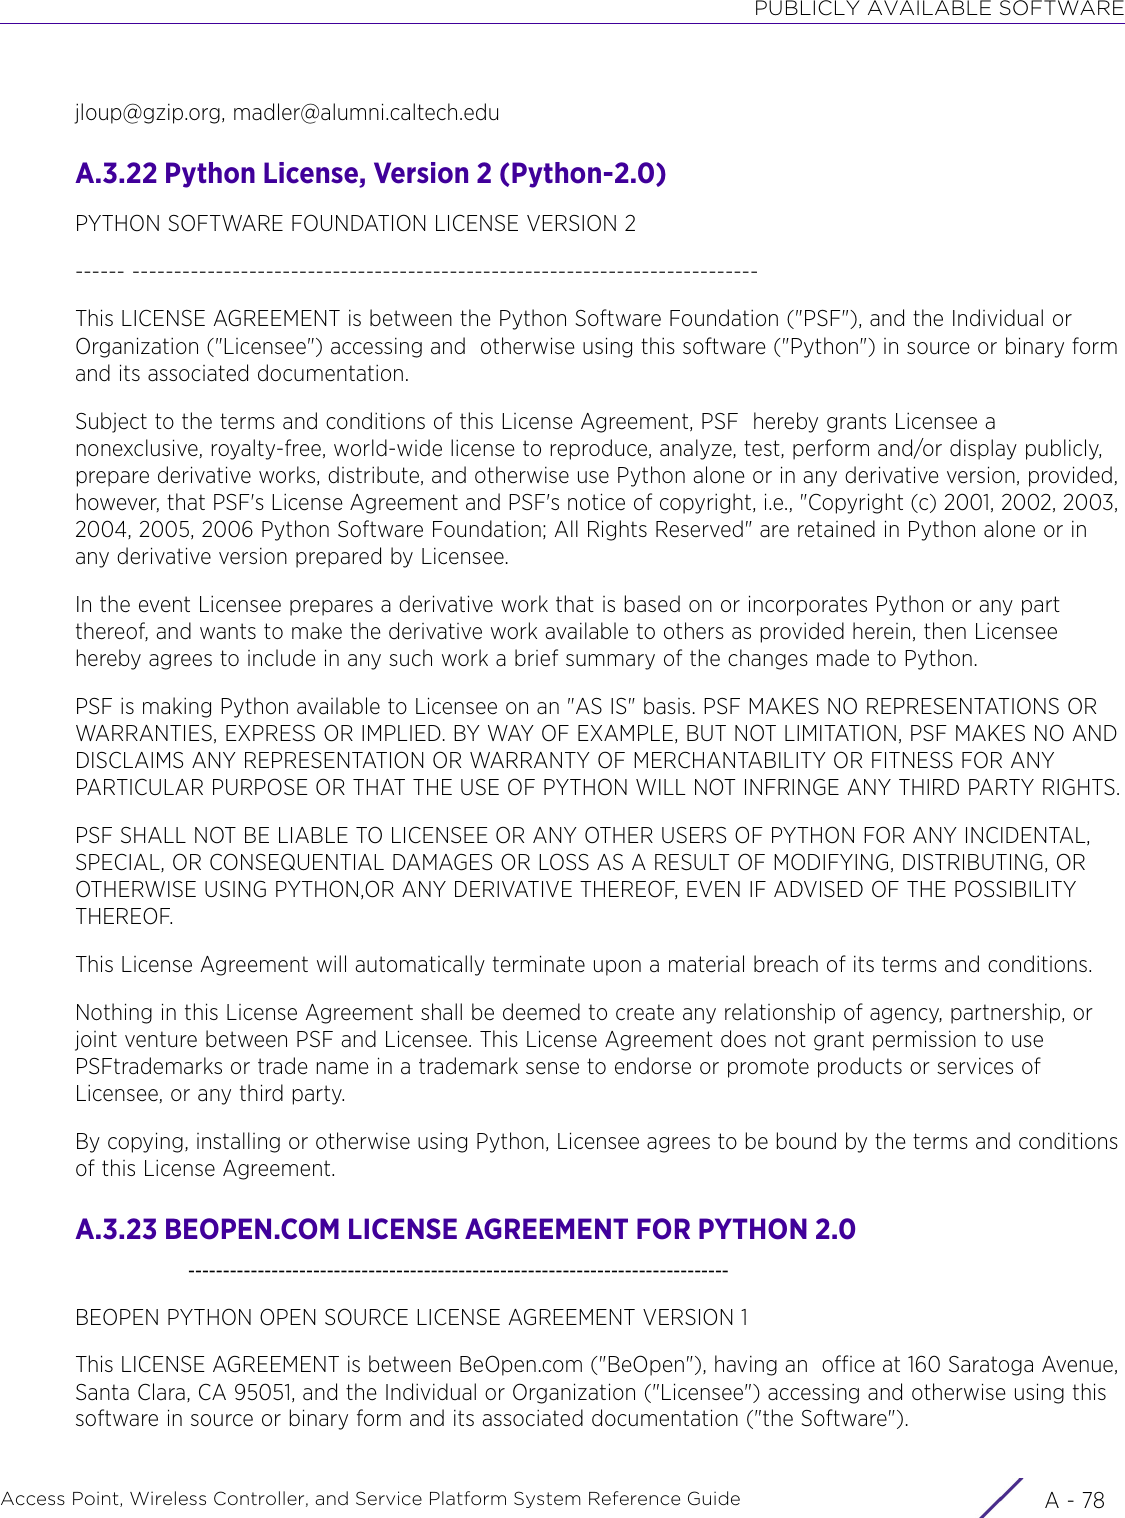 PUBLICLY AVAILABLE SOFTWAREAccess Point, Wireless Controller, and Service Platform System Reference Guide  A - 78jloup@gzip.org, madler@alumni.caltech.edu A.3.22 Python License, Version 2 (Python-2.0)PYTHON SOFTWARE FOUNDATION LICENSE VERSION 2------ ---------------------------------------------------------------------------This LICENSE AGREEMENT is between the Python Software Foundation (&quot;PSF&quot;), and the Individual or Organization (&quot;Licensee&quot;) accessing and  otherwise using this software (&quot;Python&quot;) in source or binary form and its associated documentation. Subject to the terms and conditions of this License Agreement, PSF  hereby grants Licensee a nonexclusive, royalty-free, world-wide license to reproduce, analyze, test, perform and/or display publicly, prepare derivative works, distribute, and otherwise use Python alone or in any derivative version, provided, however, that PSF&apos;s License Agreement and PSF&apos;s notice of copyright, i.e., &quot;Copyright (c) 2001, 2002, 2003, 2004, 2005, 2006 Python Software Foundation; All Rights Reserved&quot; are retained in Python alone or in any derivative version prepared by Licensee.In the event Licensee prepares a derivative work that is based on or incorporates Python or any part thereof, and wants to make the derivative work available to others as provided herein, then Licensee hereby agrees to include in any such work a brief summary of the changes made to Python.PSF is making Python available to Licensee on an &quot;AS IS&quot; basis. PSF MAKES NO REPRESENTATIONS OR WARRANTIES, EXPRESS OR IMPLIED. BY WAY OF EXAMPLE, BUT NOT LIMITATION, PSF MAKES NO AND DISCLAIMS ANY REPRESENTATION OR WARRANTY OF MERCHANTABILITY OR FITNESS FOR ANY PARTICULAR PURPOSE OR THAT THE USE OF PYTHON WILL NOT INFRINGE ANY THIRD PARTY RIGHTS.PSF SHALL NOT BE LIABLE TO LICENSEE OR ANY OTHER USERS OF PYTHON FOR ANY INCIDENTAL, SPECIAL, OR CONSEQUENTIAL DAMAGES OR LOSS AS A RESULT OF MODIFYING, DISTRIBUTING, OR OTHERWISE USING PYTHON,OR ANY DERIVATIVE THEREOF, EVEN IF ADVISED OF THE POSSIBILITY THEREOF.This License Agreement will automatically terminate upon a material breach of its terms and conditions.Nothing in this License Agreement shall be deemed to create any relationship of agency, partnership, or joint venture between PSF and Licensee. This License Agreement does not grant permission to use PSFtrademarks or trade name in a trademark sense to endorse or promote products or services of Licensee, or any third party.By copying, installing or otherwise using Python, Licensee agrees to be bound by the terms and conditions of this License Agreement.A.3.23 BEOPEN.COM LICENSE AGREEMENT FOR PYTHON 2.0    ------------------------------------------------------------------------------BEOPEN PYTHON OPEN SOURCE LICENSE AGREEMENT VERSION 1This LICENSE AGREEMENT is between BeOpen.com (&quot;BeOpen&quot;), having an  office at 160 Saratoga Avenue, Santa Clara, CA 95051, and the Individual or Organization (&quot;Licensee&quot;) accessing and otherwise using this software in source or binary form and its associated documentation (&quot;the Software&quot;).